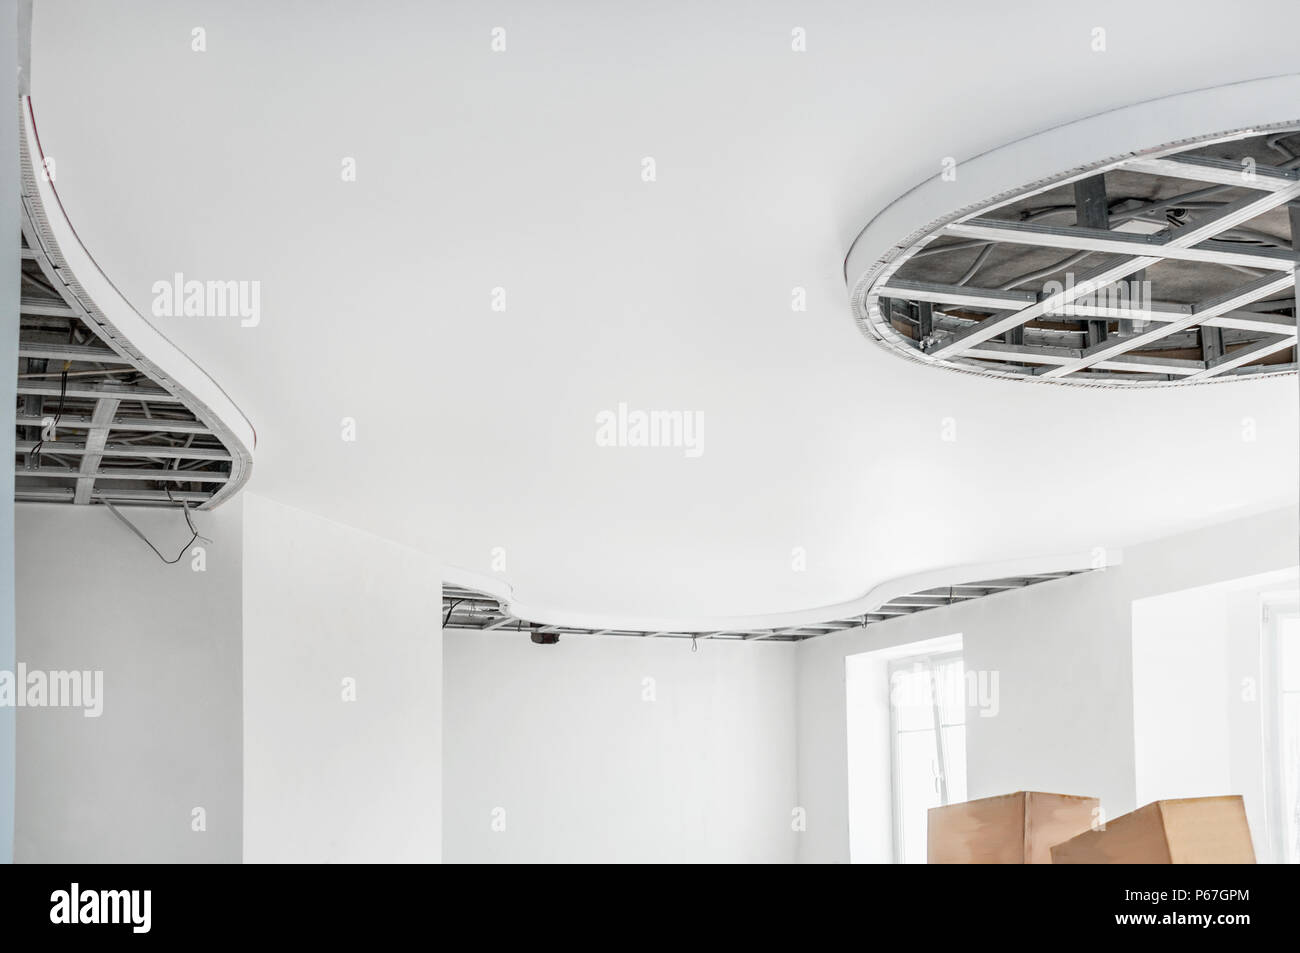 Installation Of Plasterboard Ceiling The Repair Of An Apartment